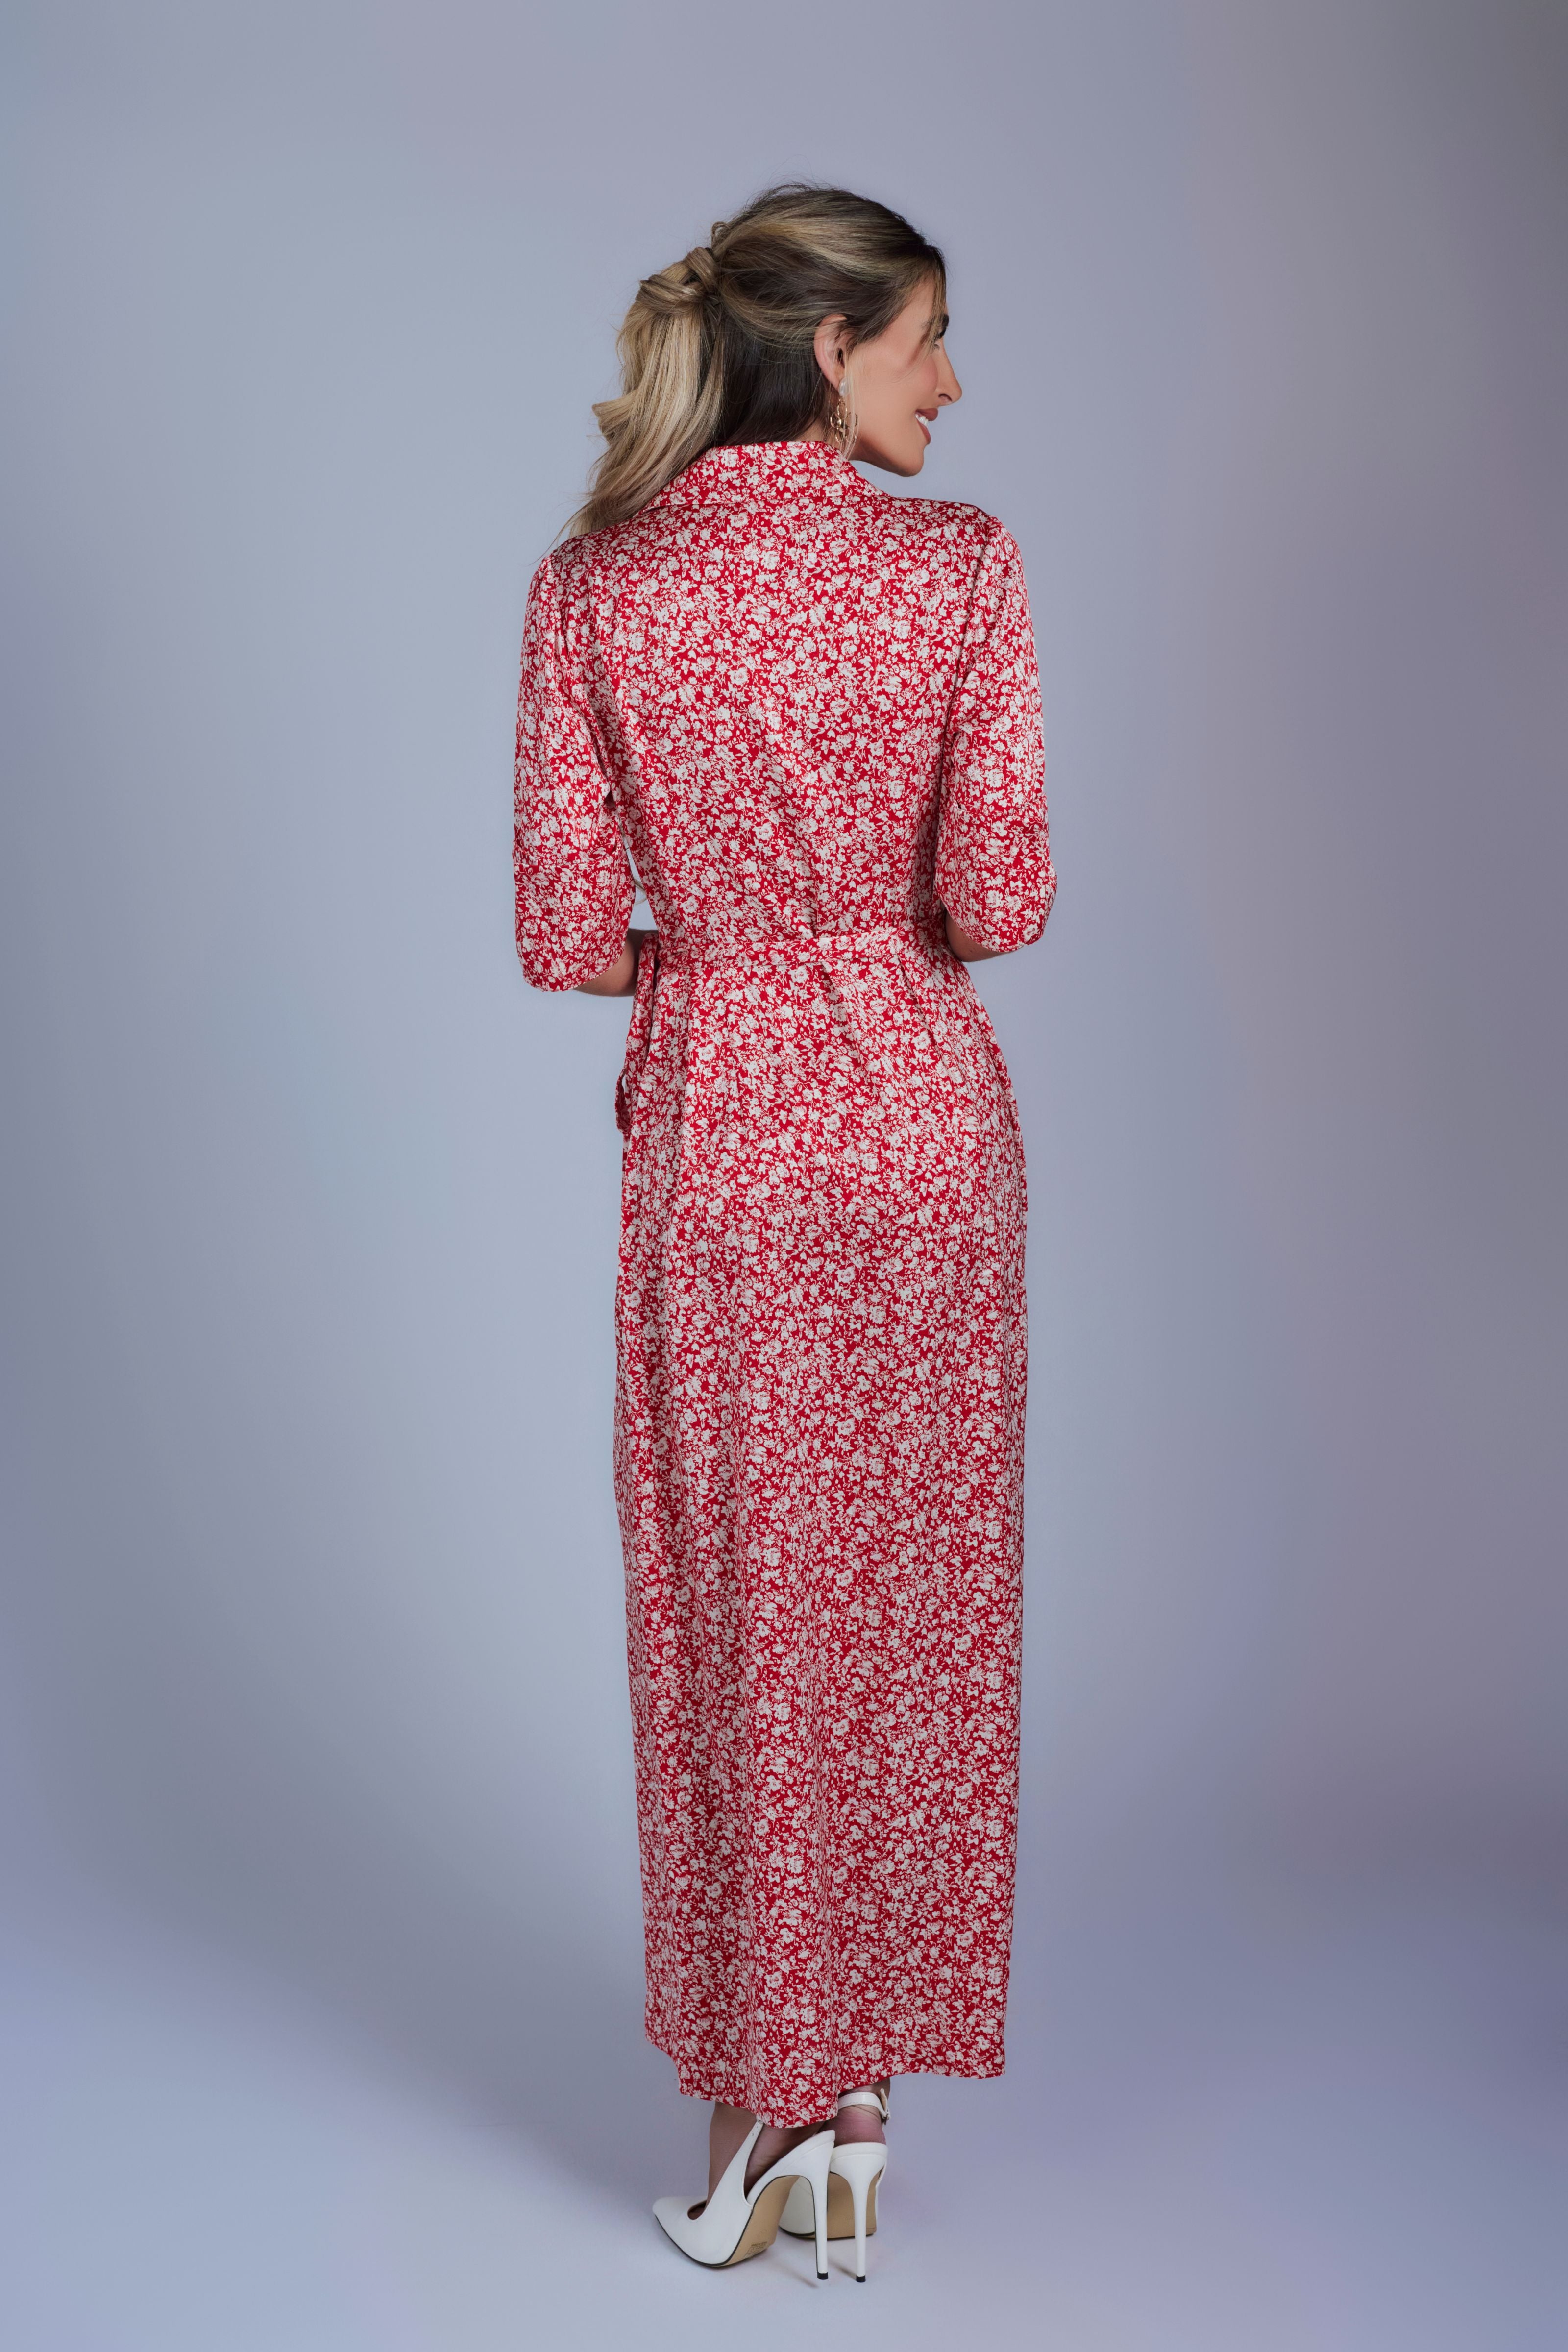 Floral Maxi Wrap Dress - Red and Cream - Olivvi World